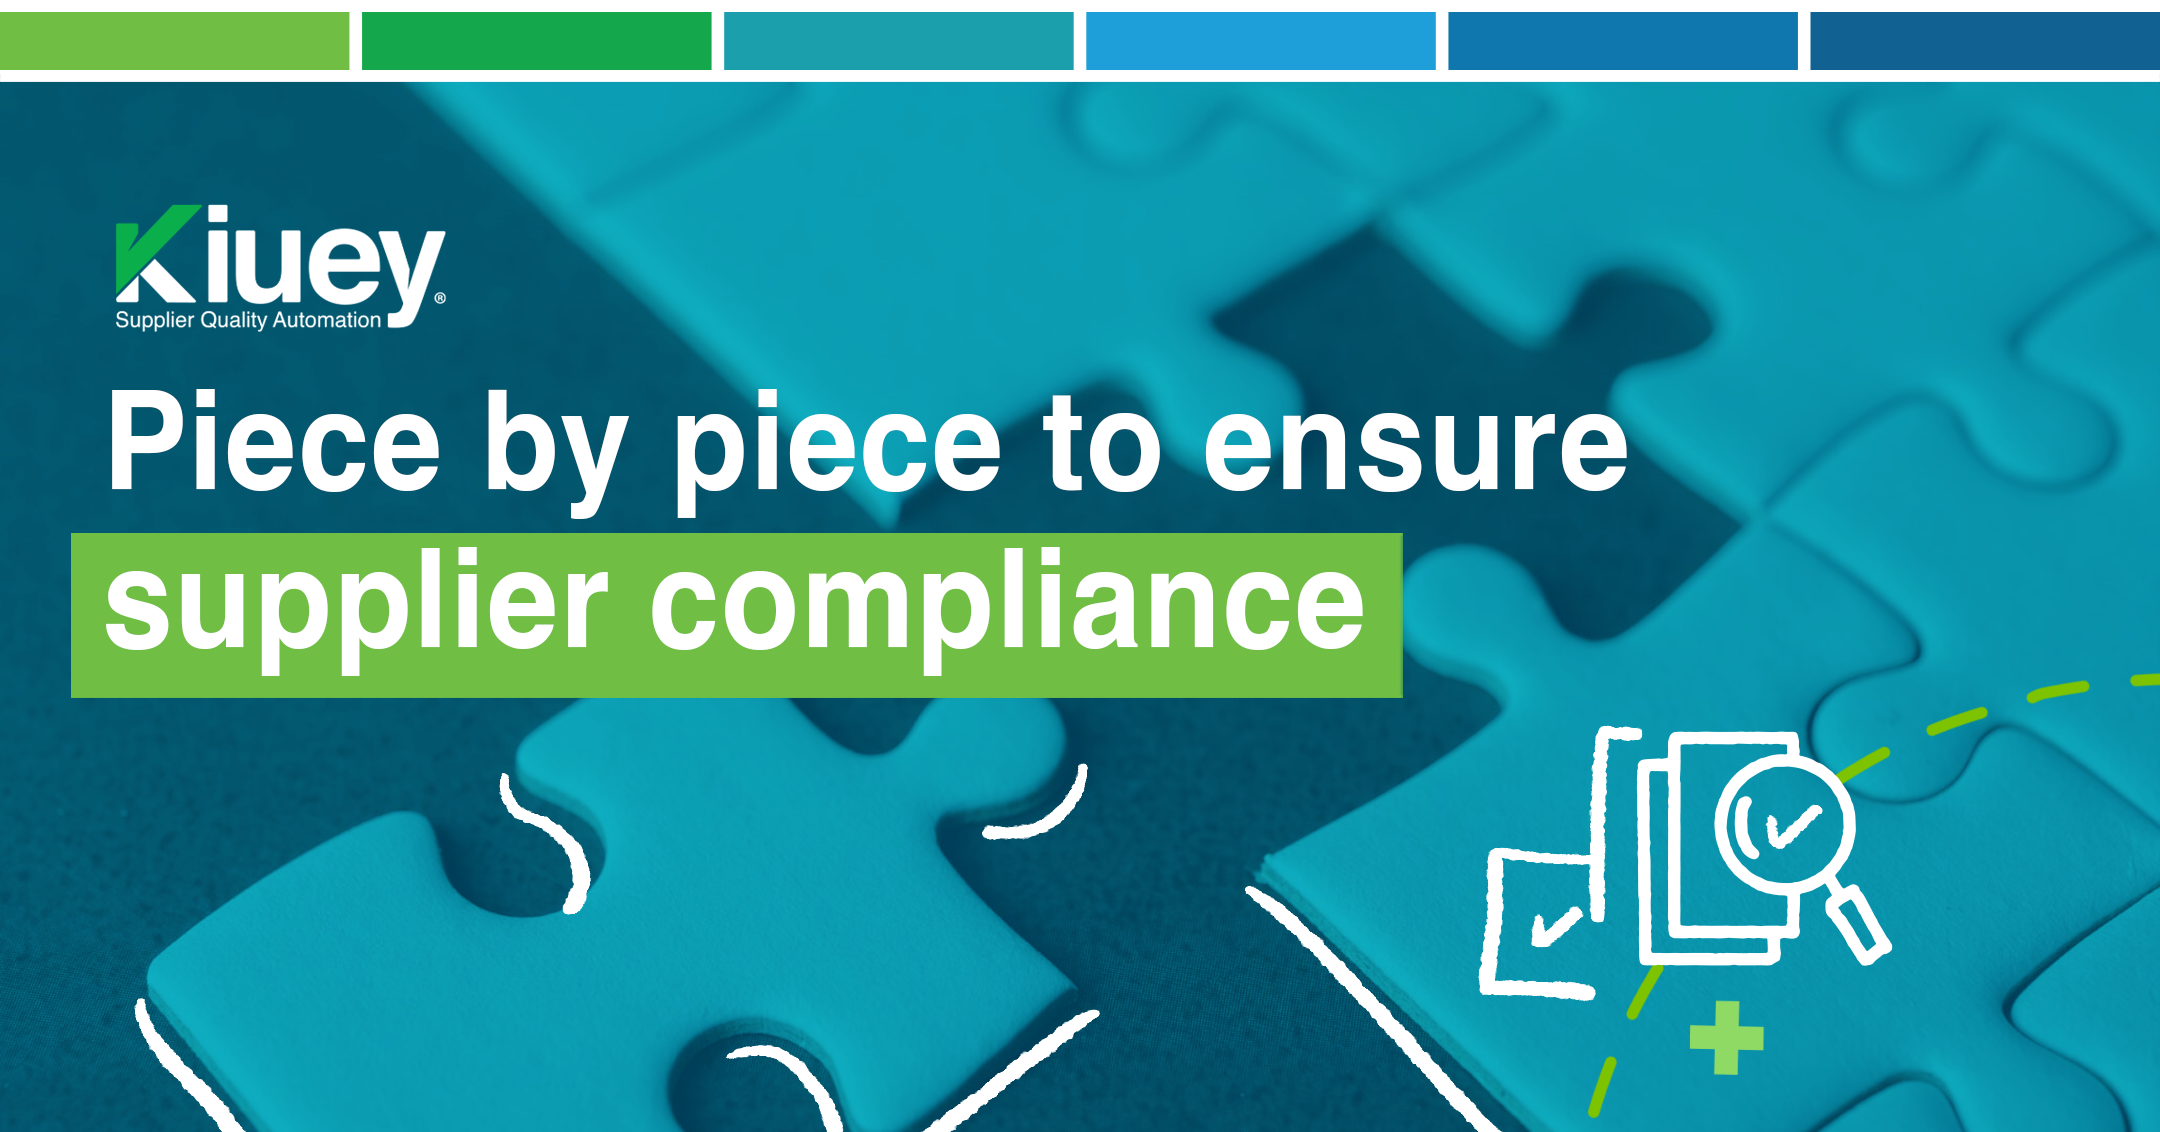 How to ensure supplier compliance, piece by piece